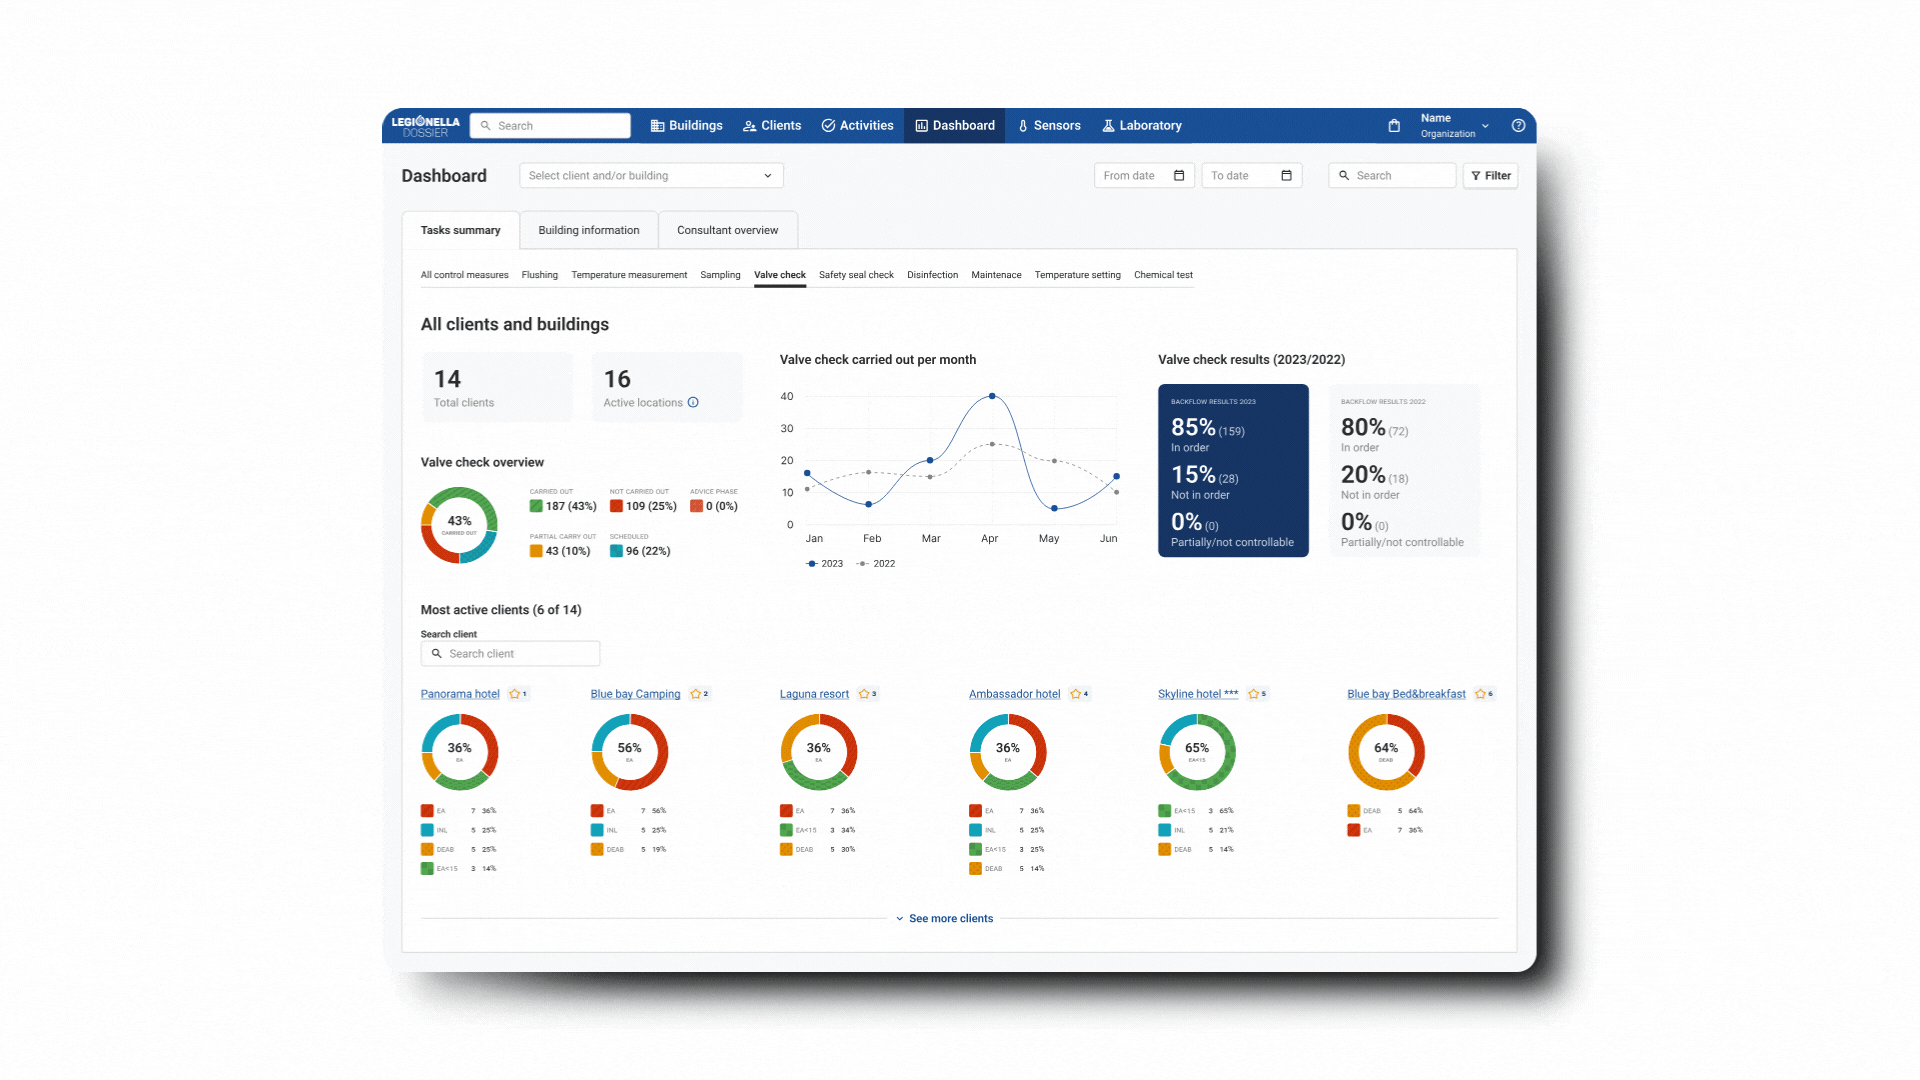 New dashboards LD 1.3 release (2)